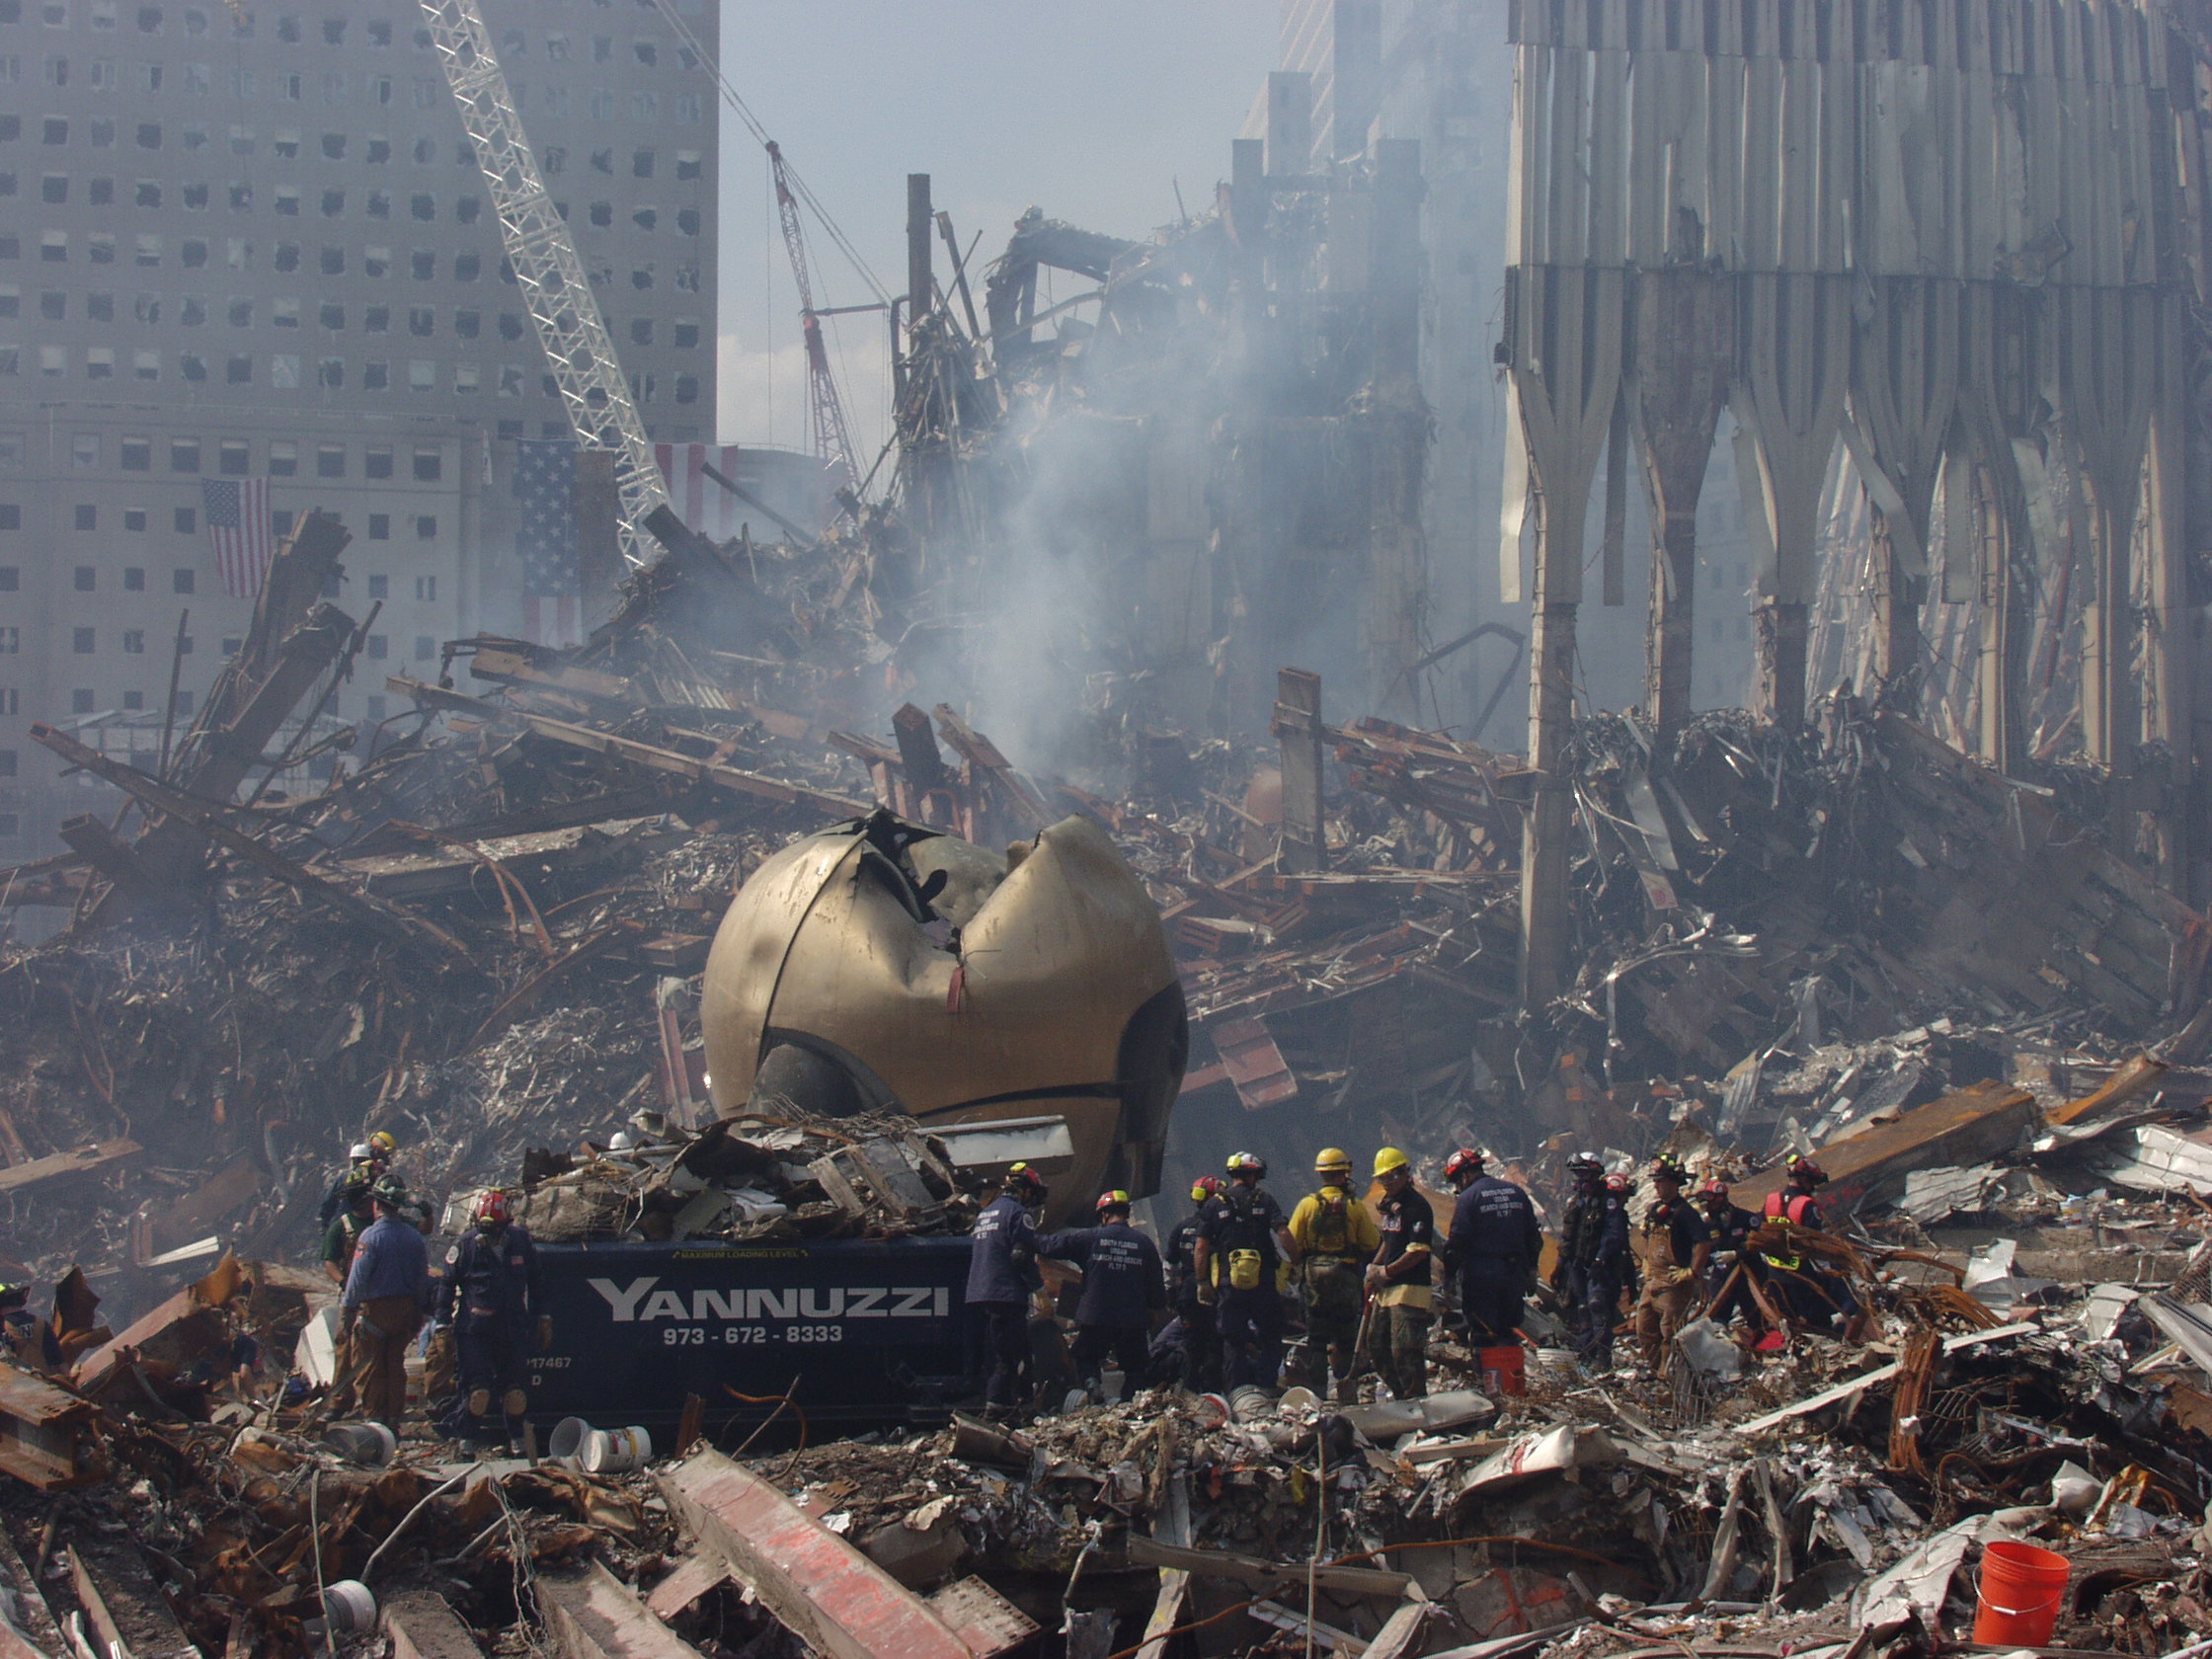 The heavily damaged Koenig Sphere stands in the debris of Ground Zero after the 9/11 attacks. Dozens of rescue workers stand around the sphere. The rubble of the Twin Towers can be seen in the background.